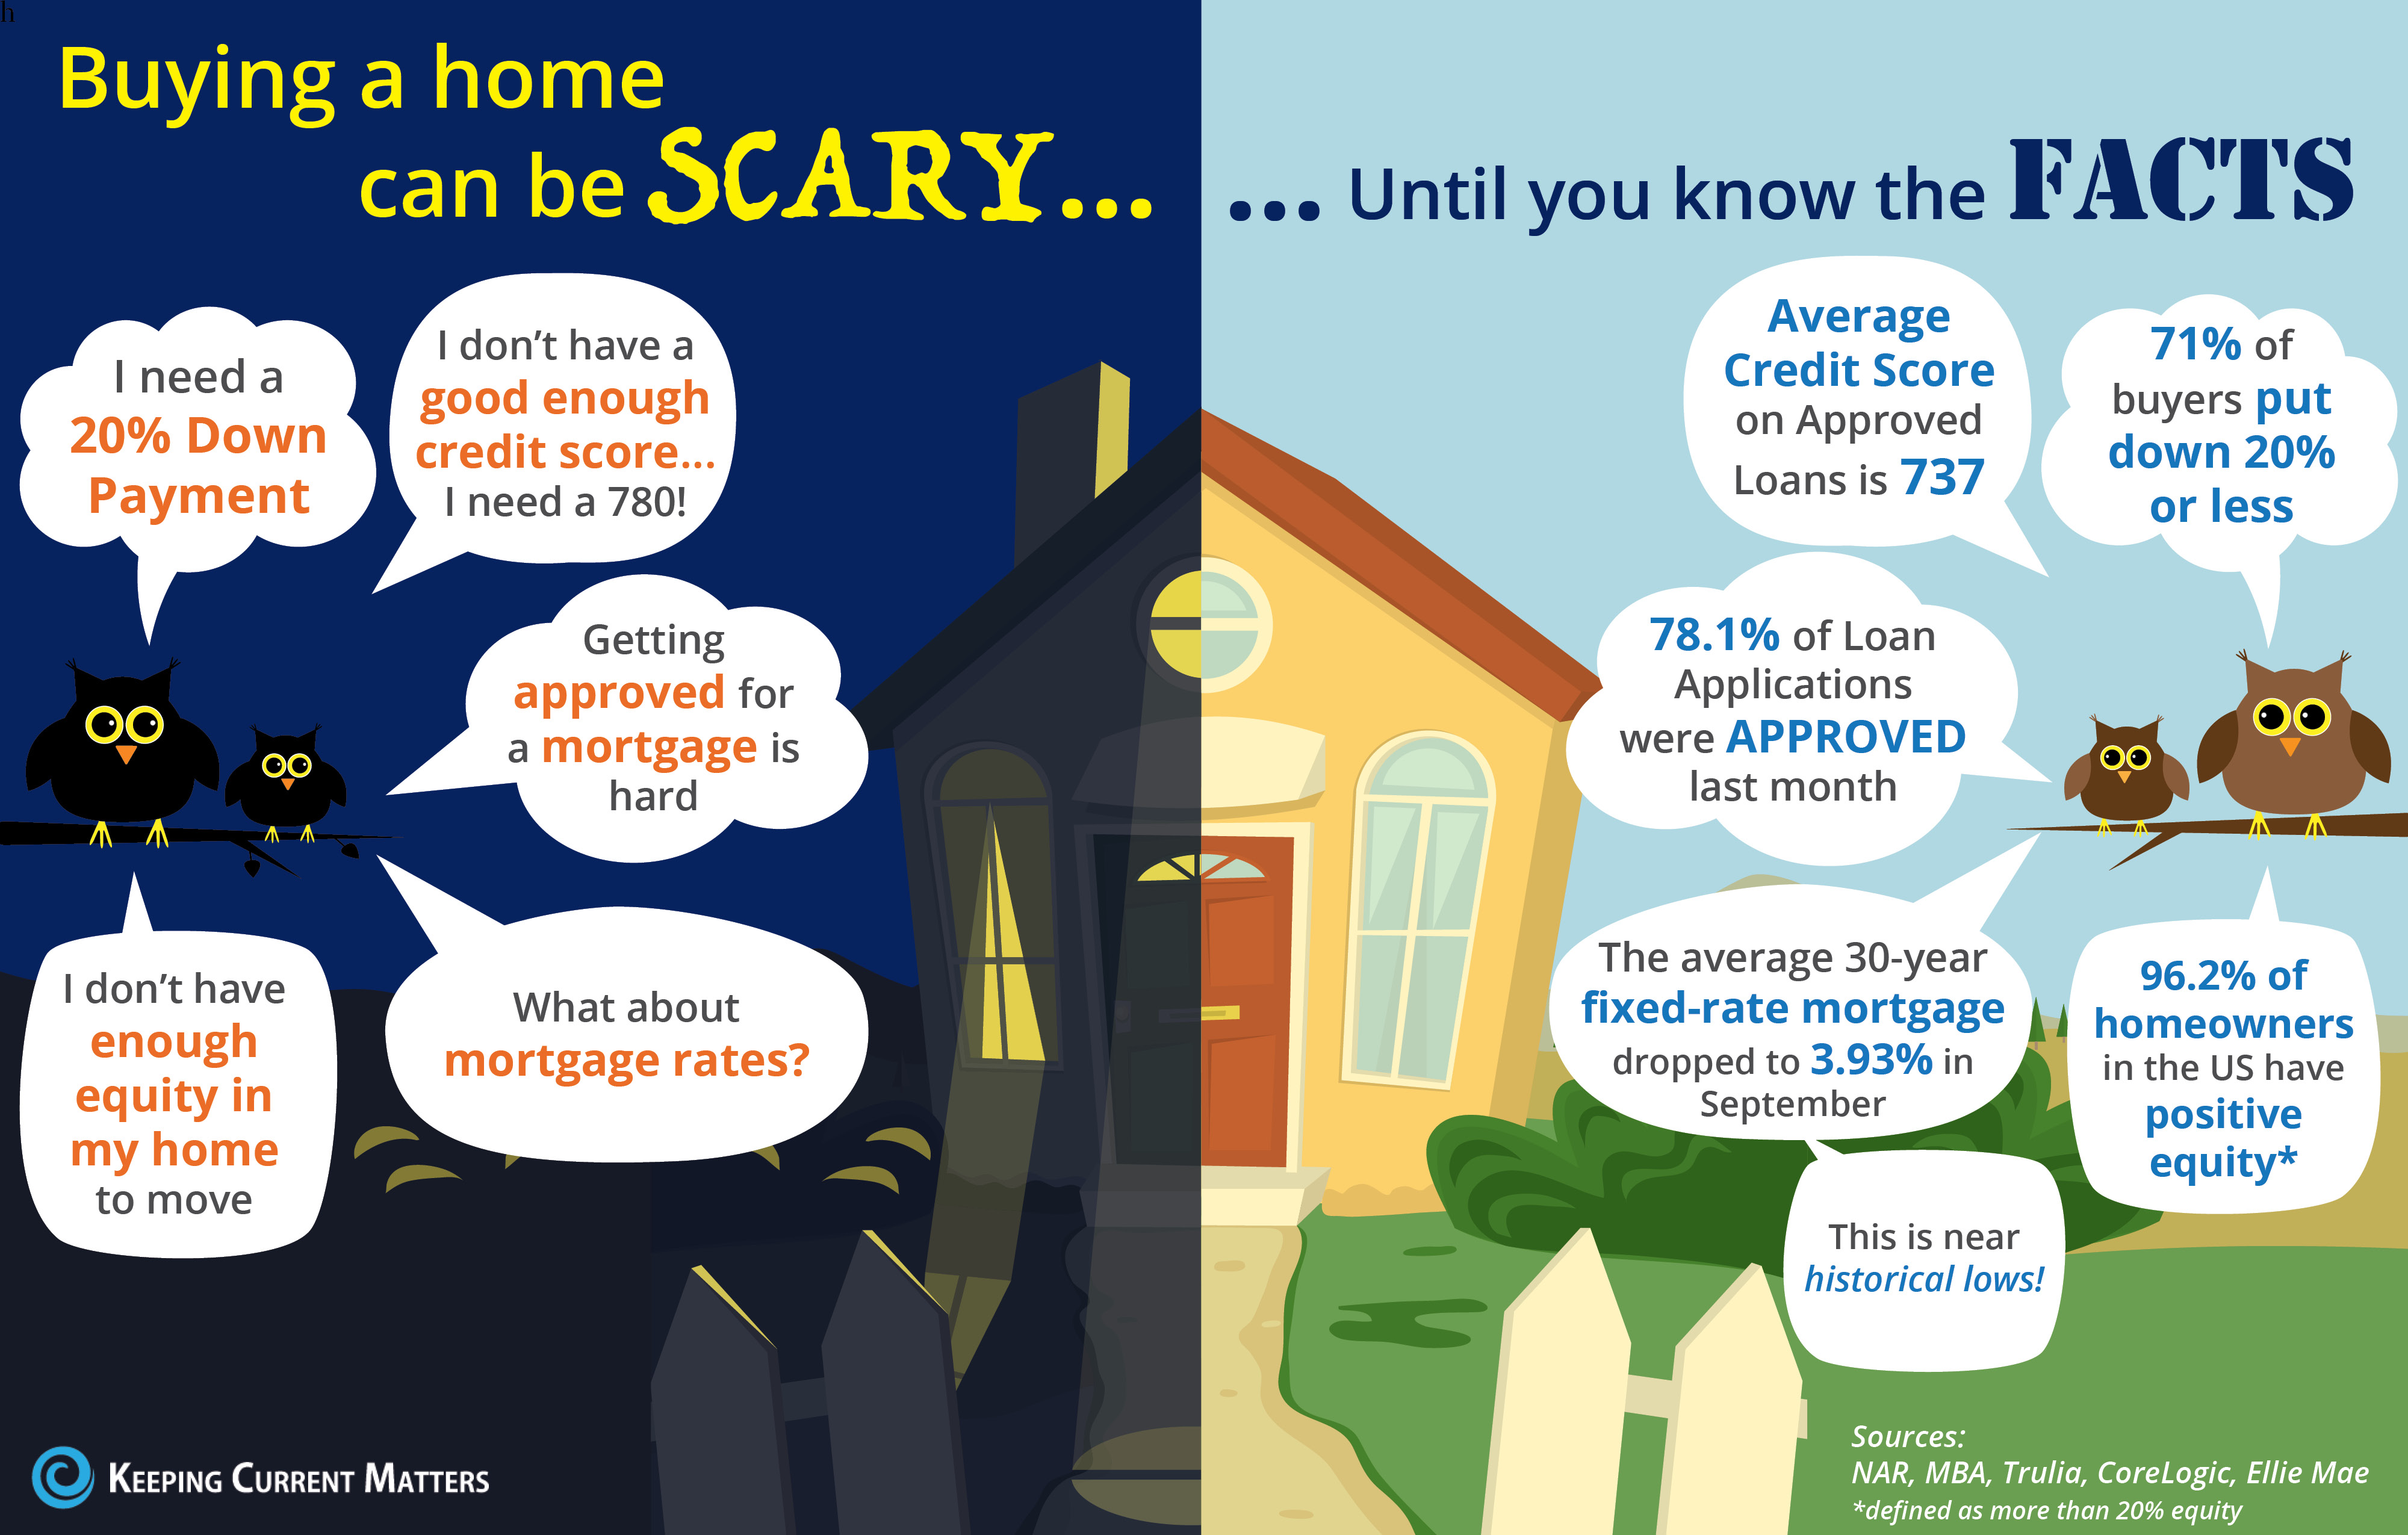 Know the Facts About Buying a Home!